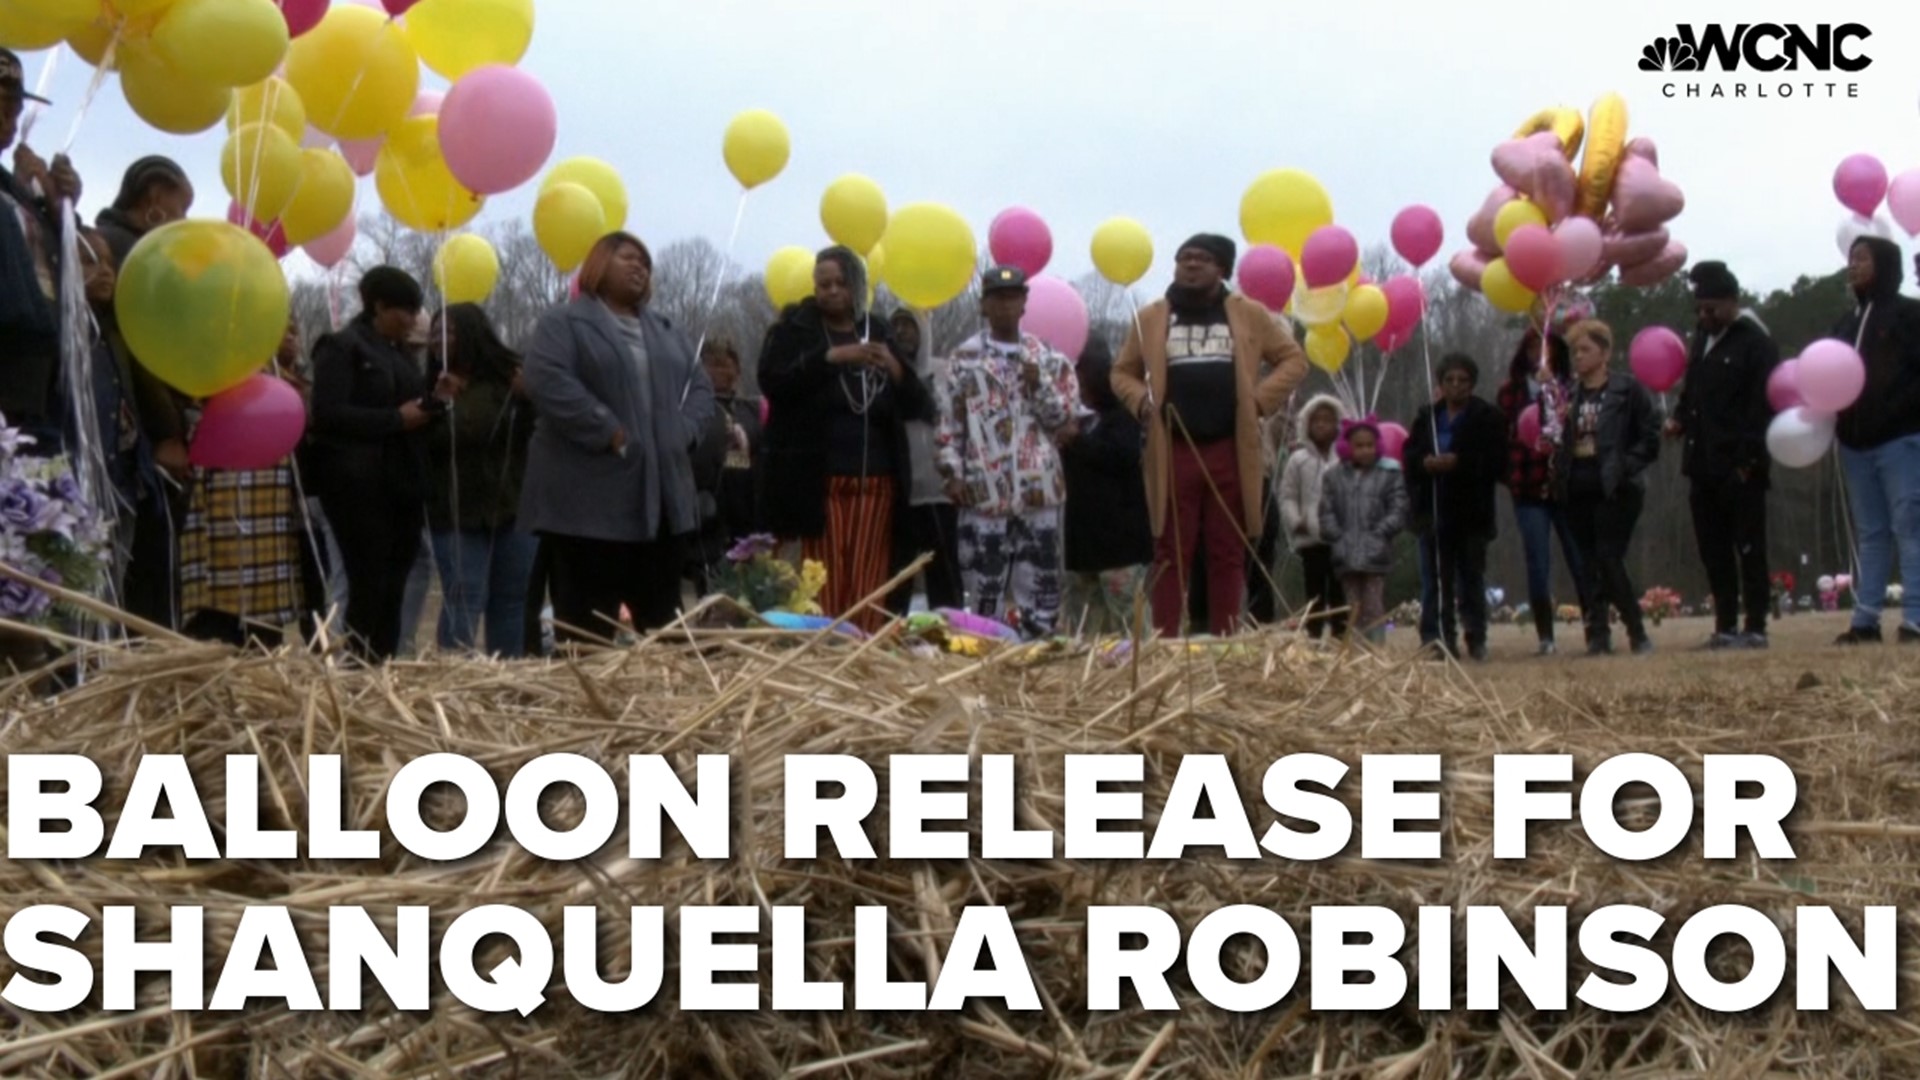 Friends and family members gathered to honor the memory of Shanquella Robinson a day before what would have been her 26th birthday.